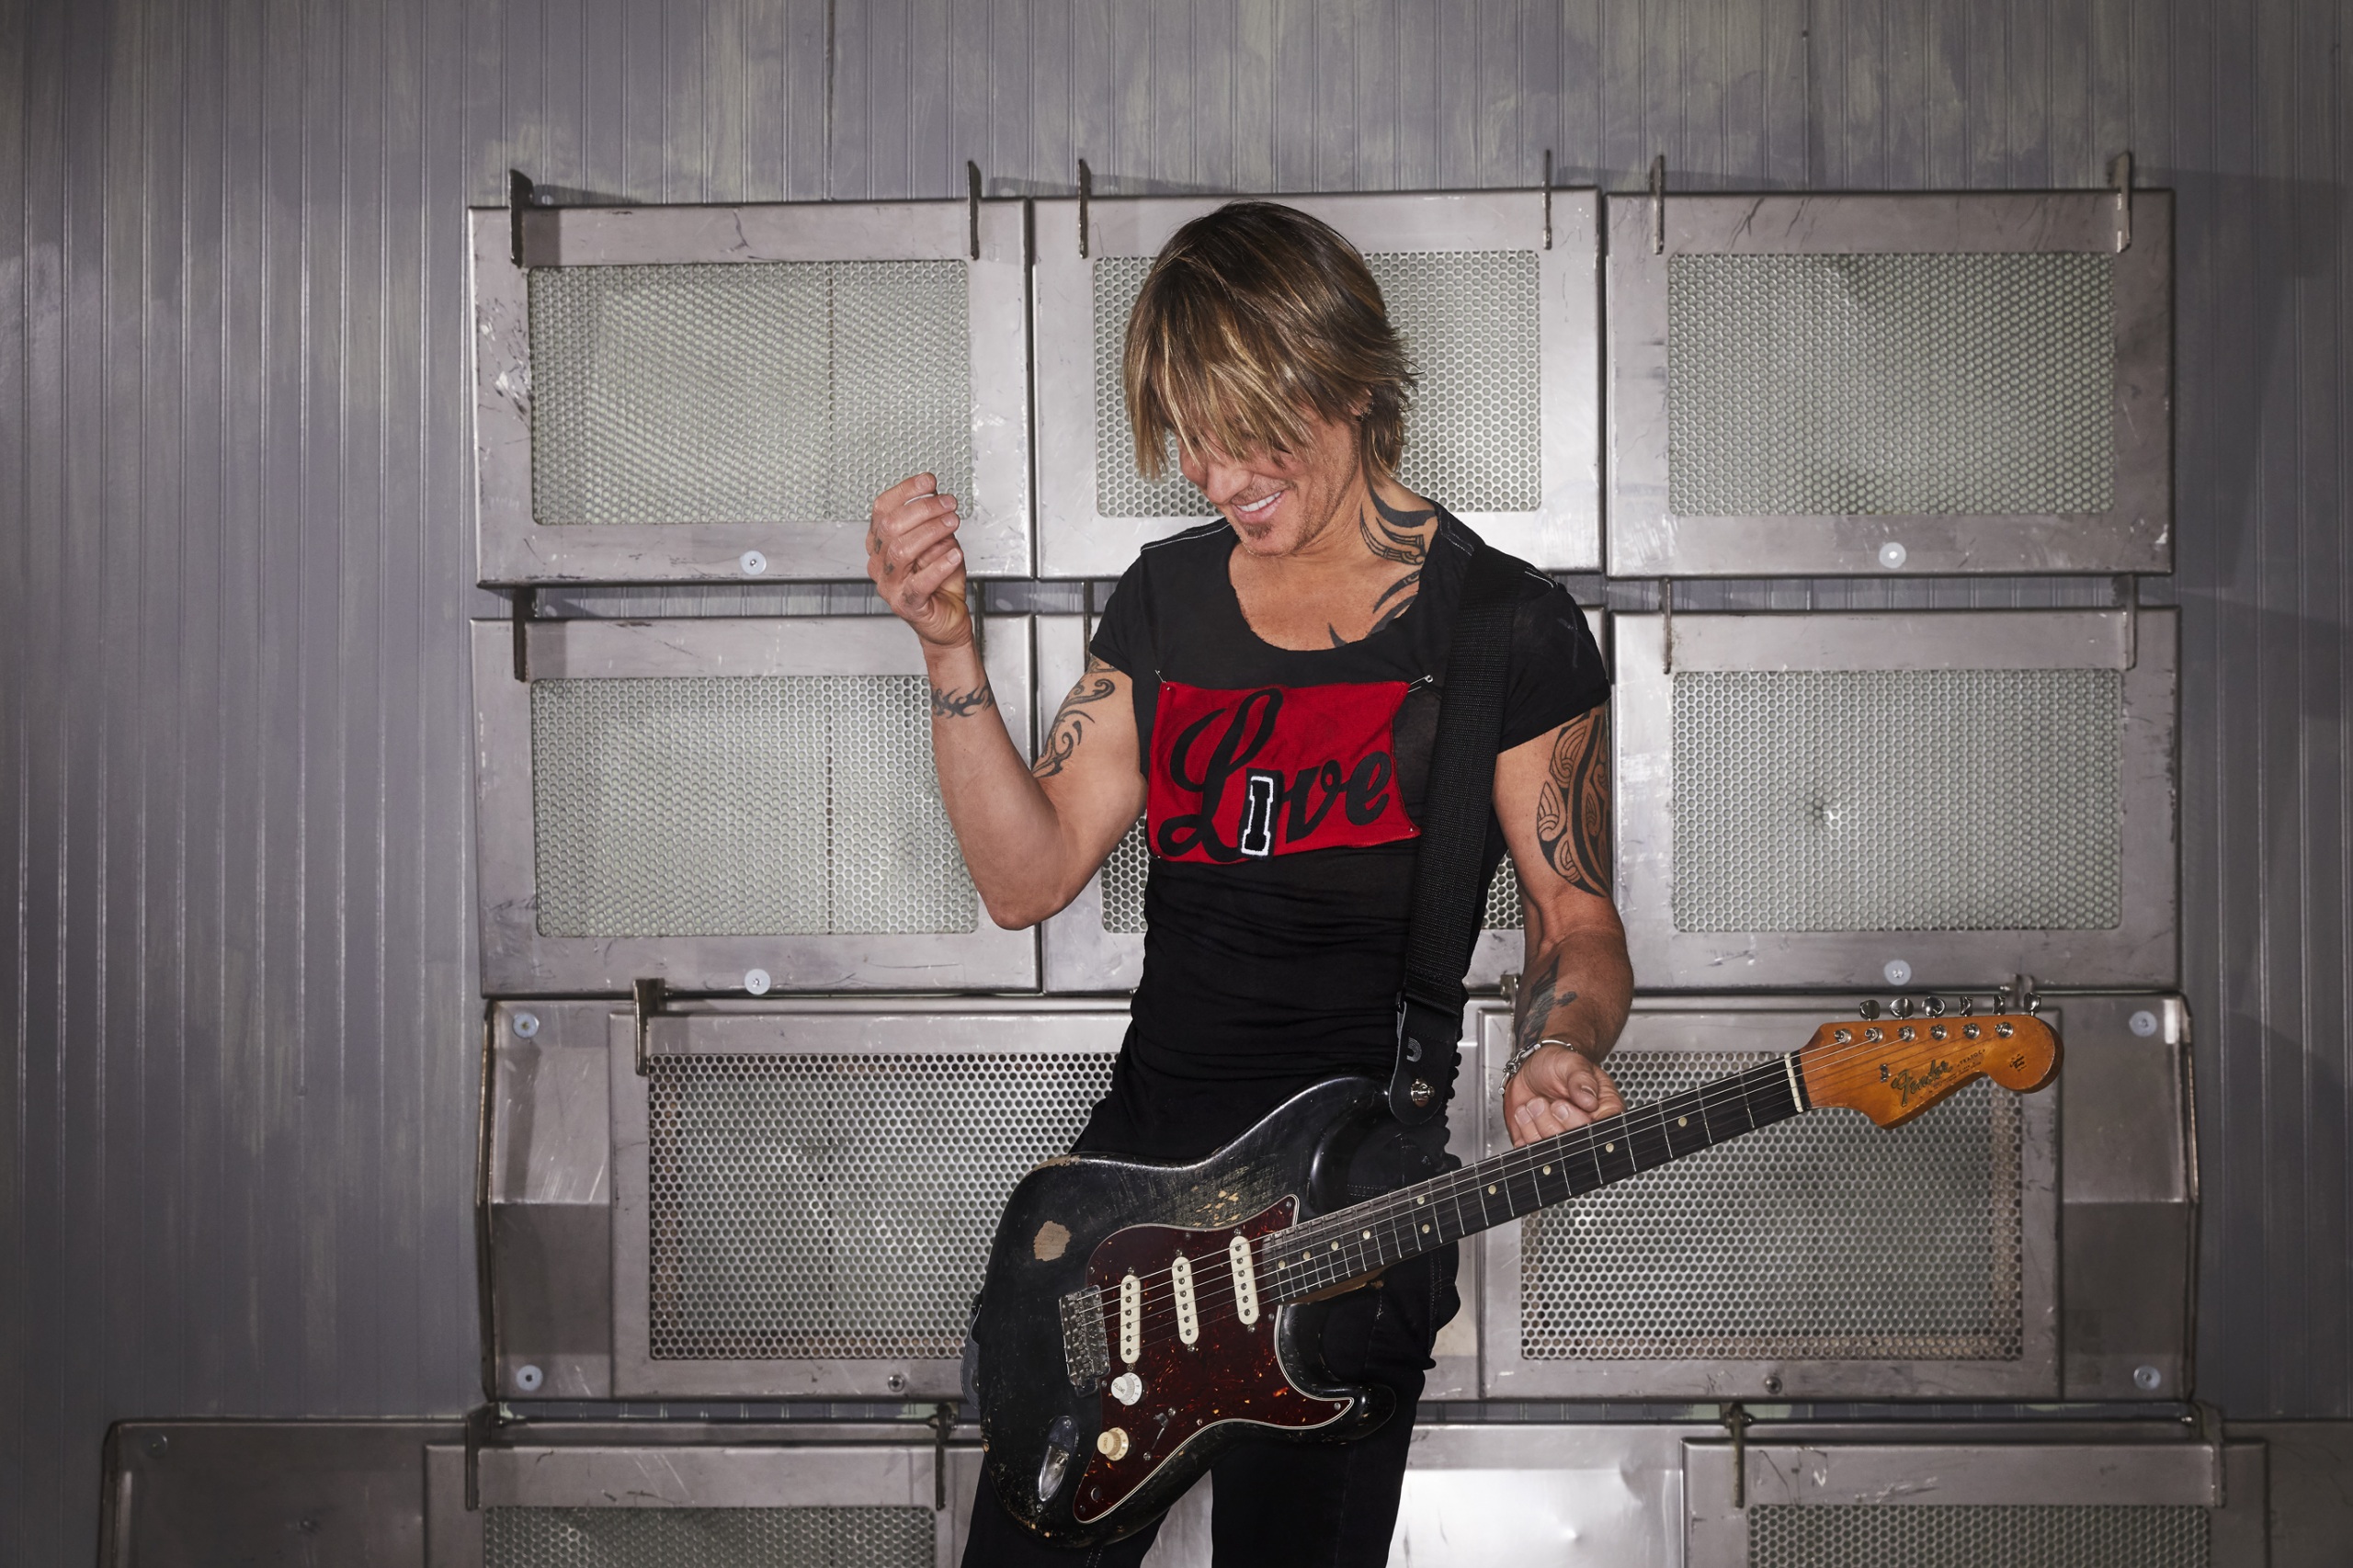 KEITH URBAN MADE HIS 20TH APPEARANCE ON THE ELLEN DeGENERES SHOW DURING HER FINAL SEASON.